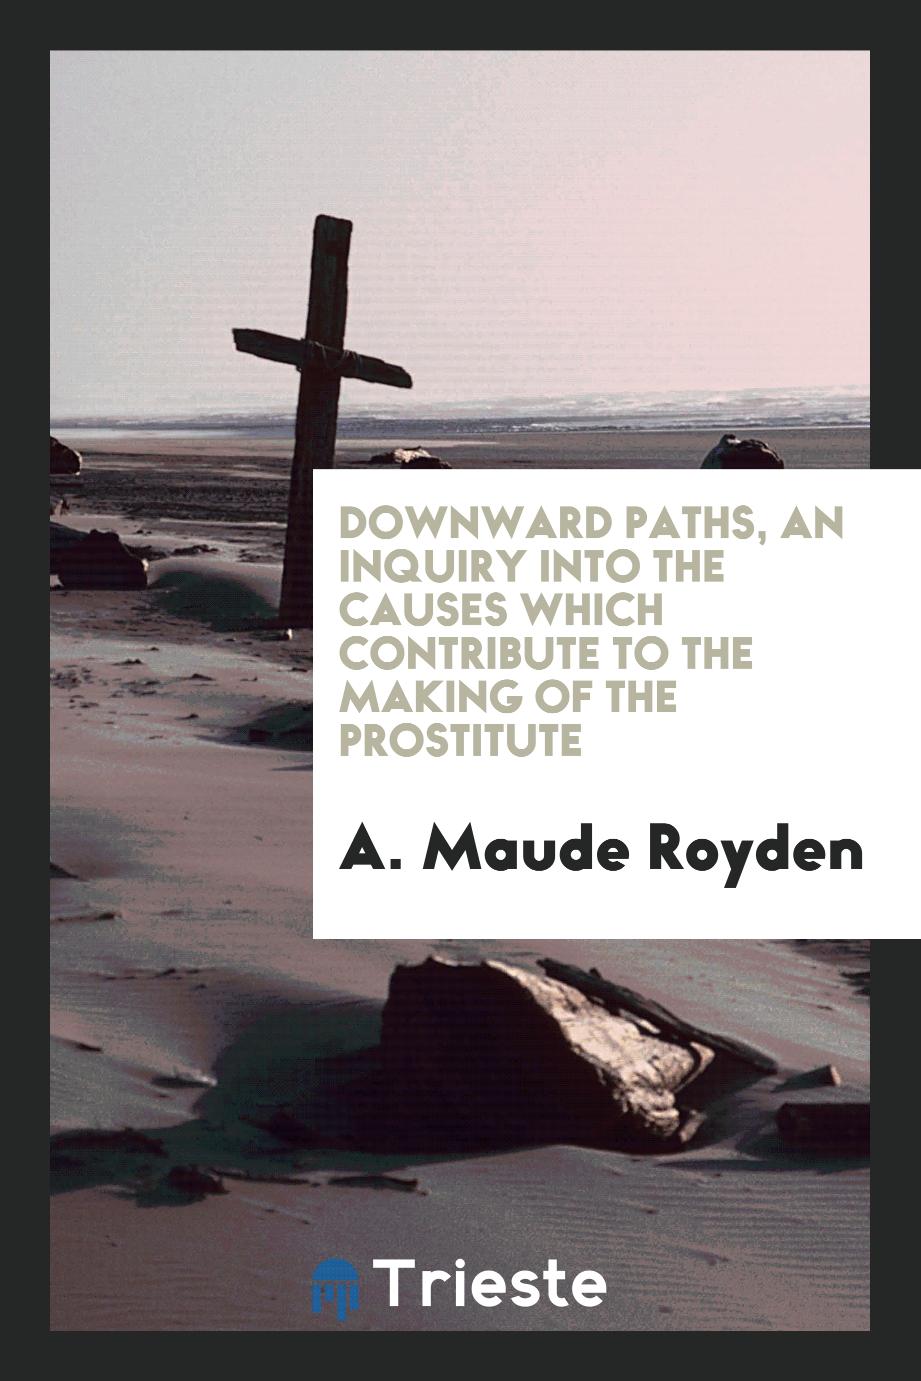 Downward paths, an inquiry into the causes which contribute to the making of the prostitute